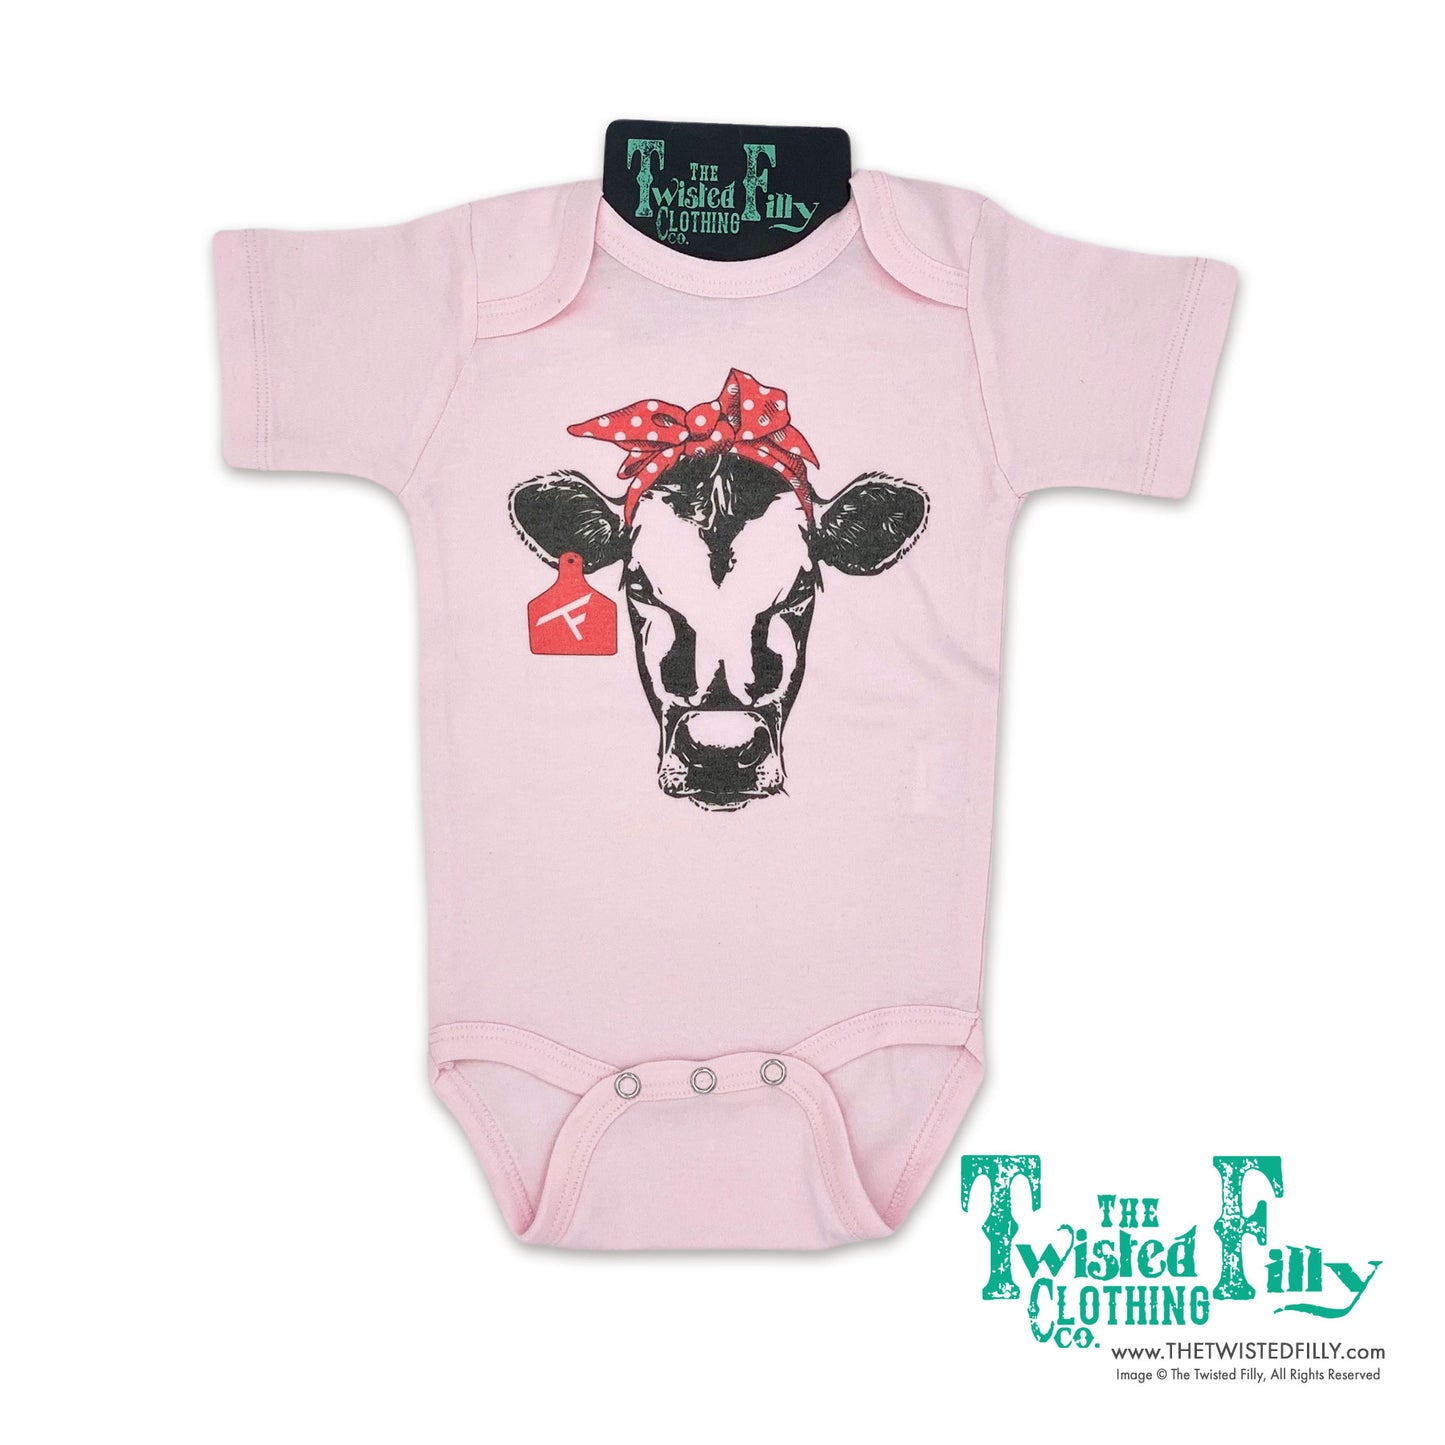 Red Bandana Calf - S/S Infant One Piece - Pink